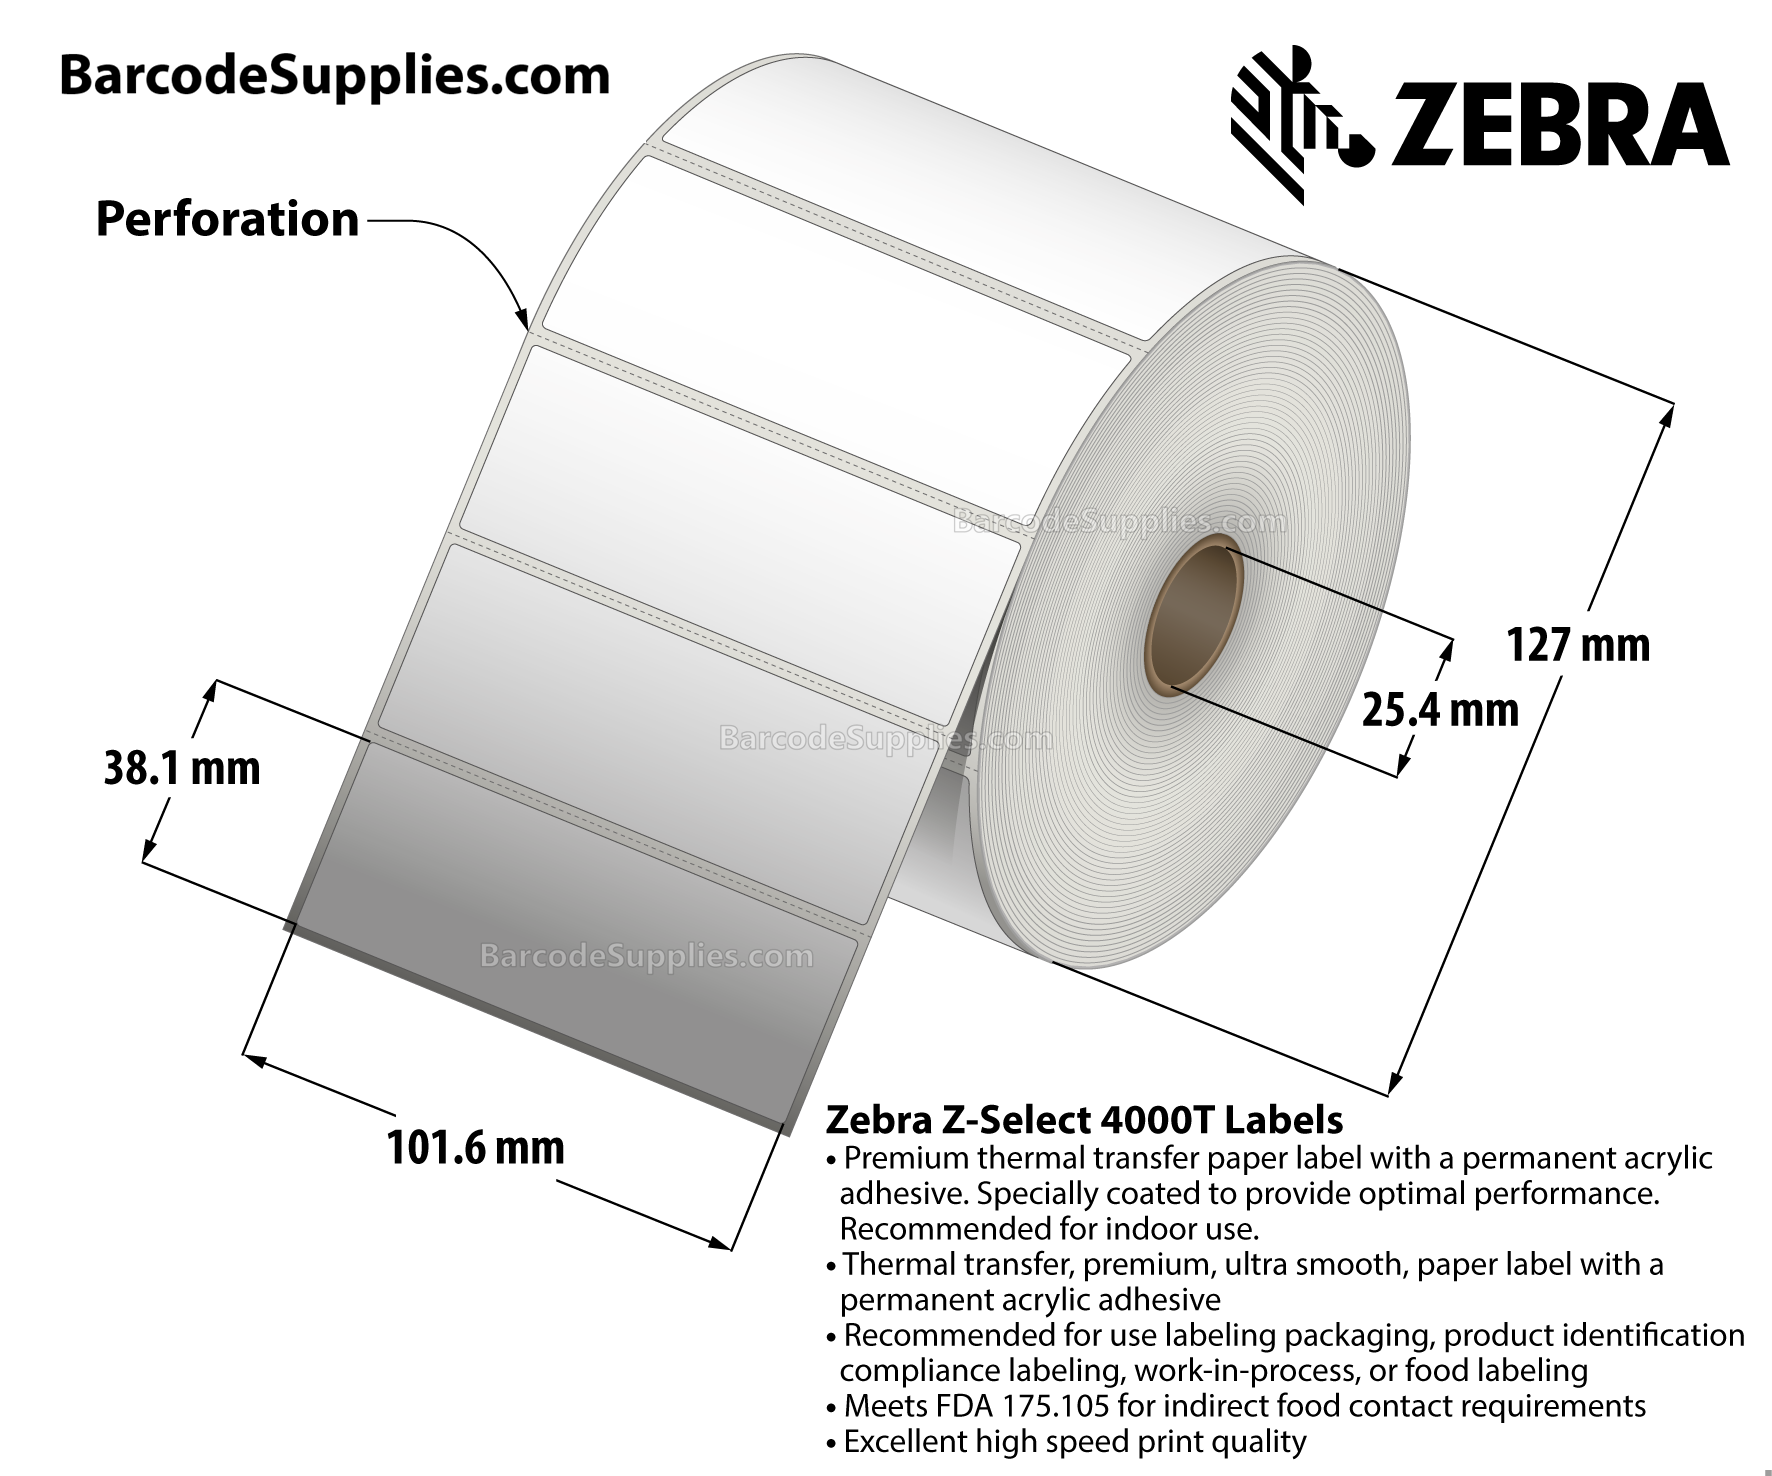 4 x 1.5 Thermal Transfer White Z-Select 4000T Labels With Permanent Adhesive - Perforated - 1790 Labels Per Roll - Carton Of 12 Rolls - 21480 Labels Total - MPN: 800274-155